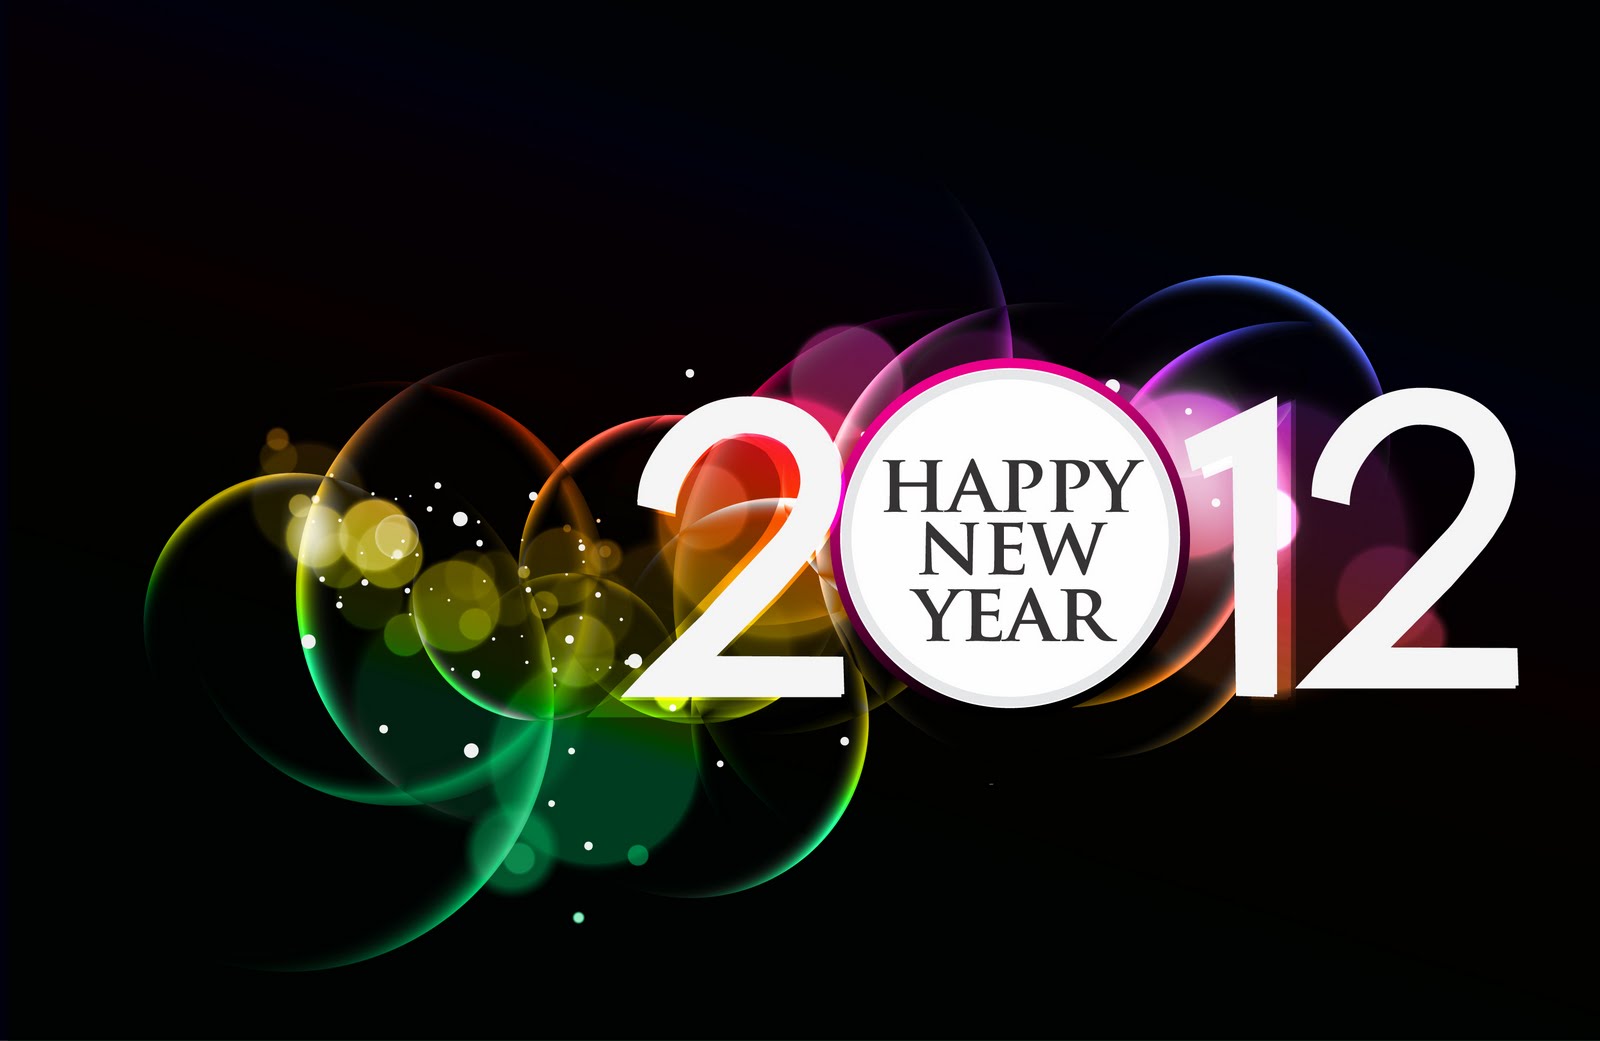 Nice wallpapers New Year 2012 1600x1041px